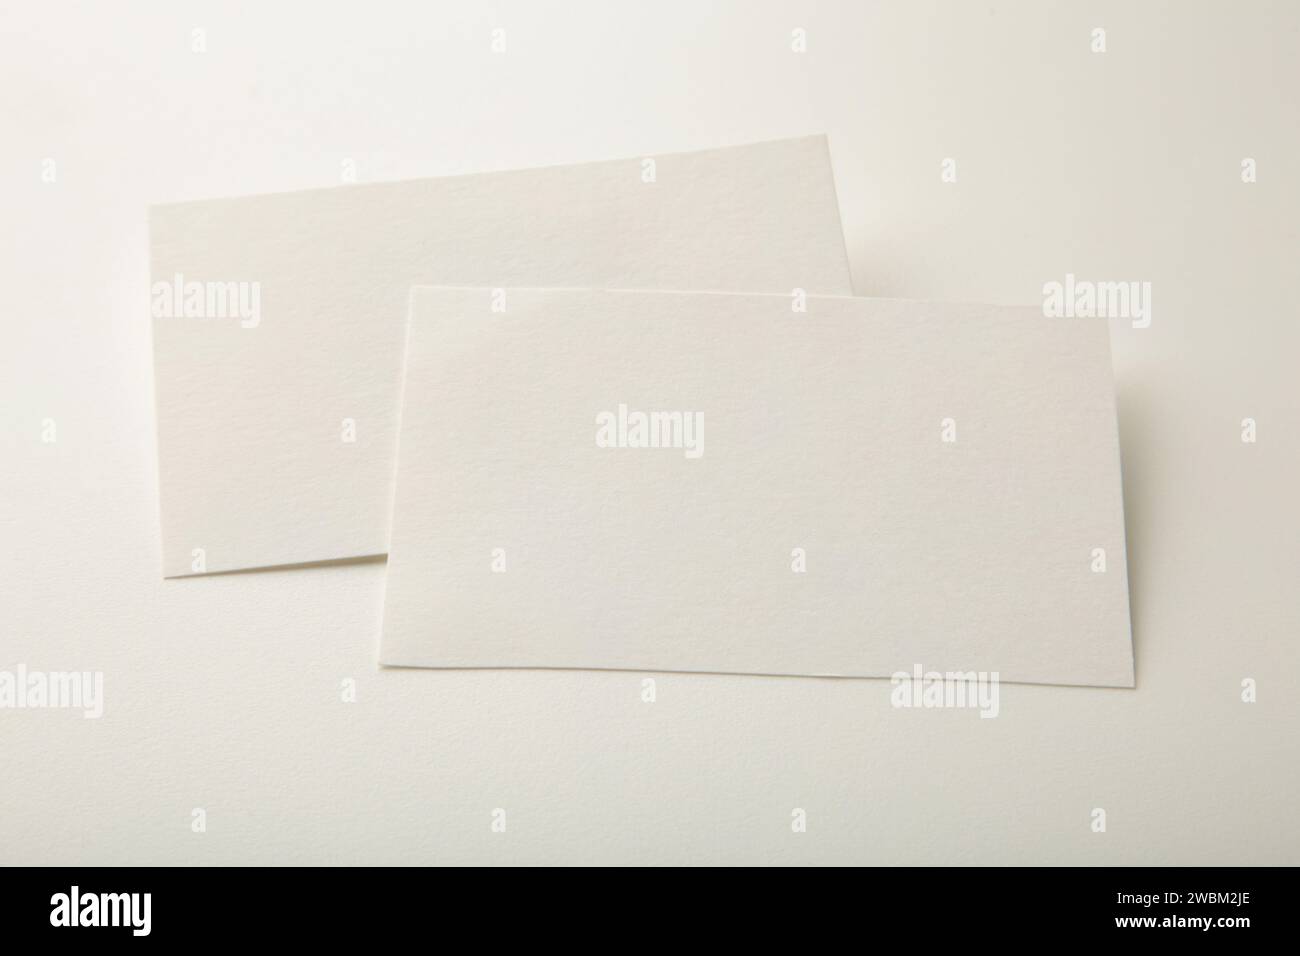 Blank white business cards on white paper background. Mockup for branding identity. Template for graphic designers portfolios. Stock Photo